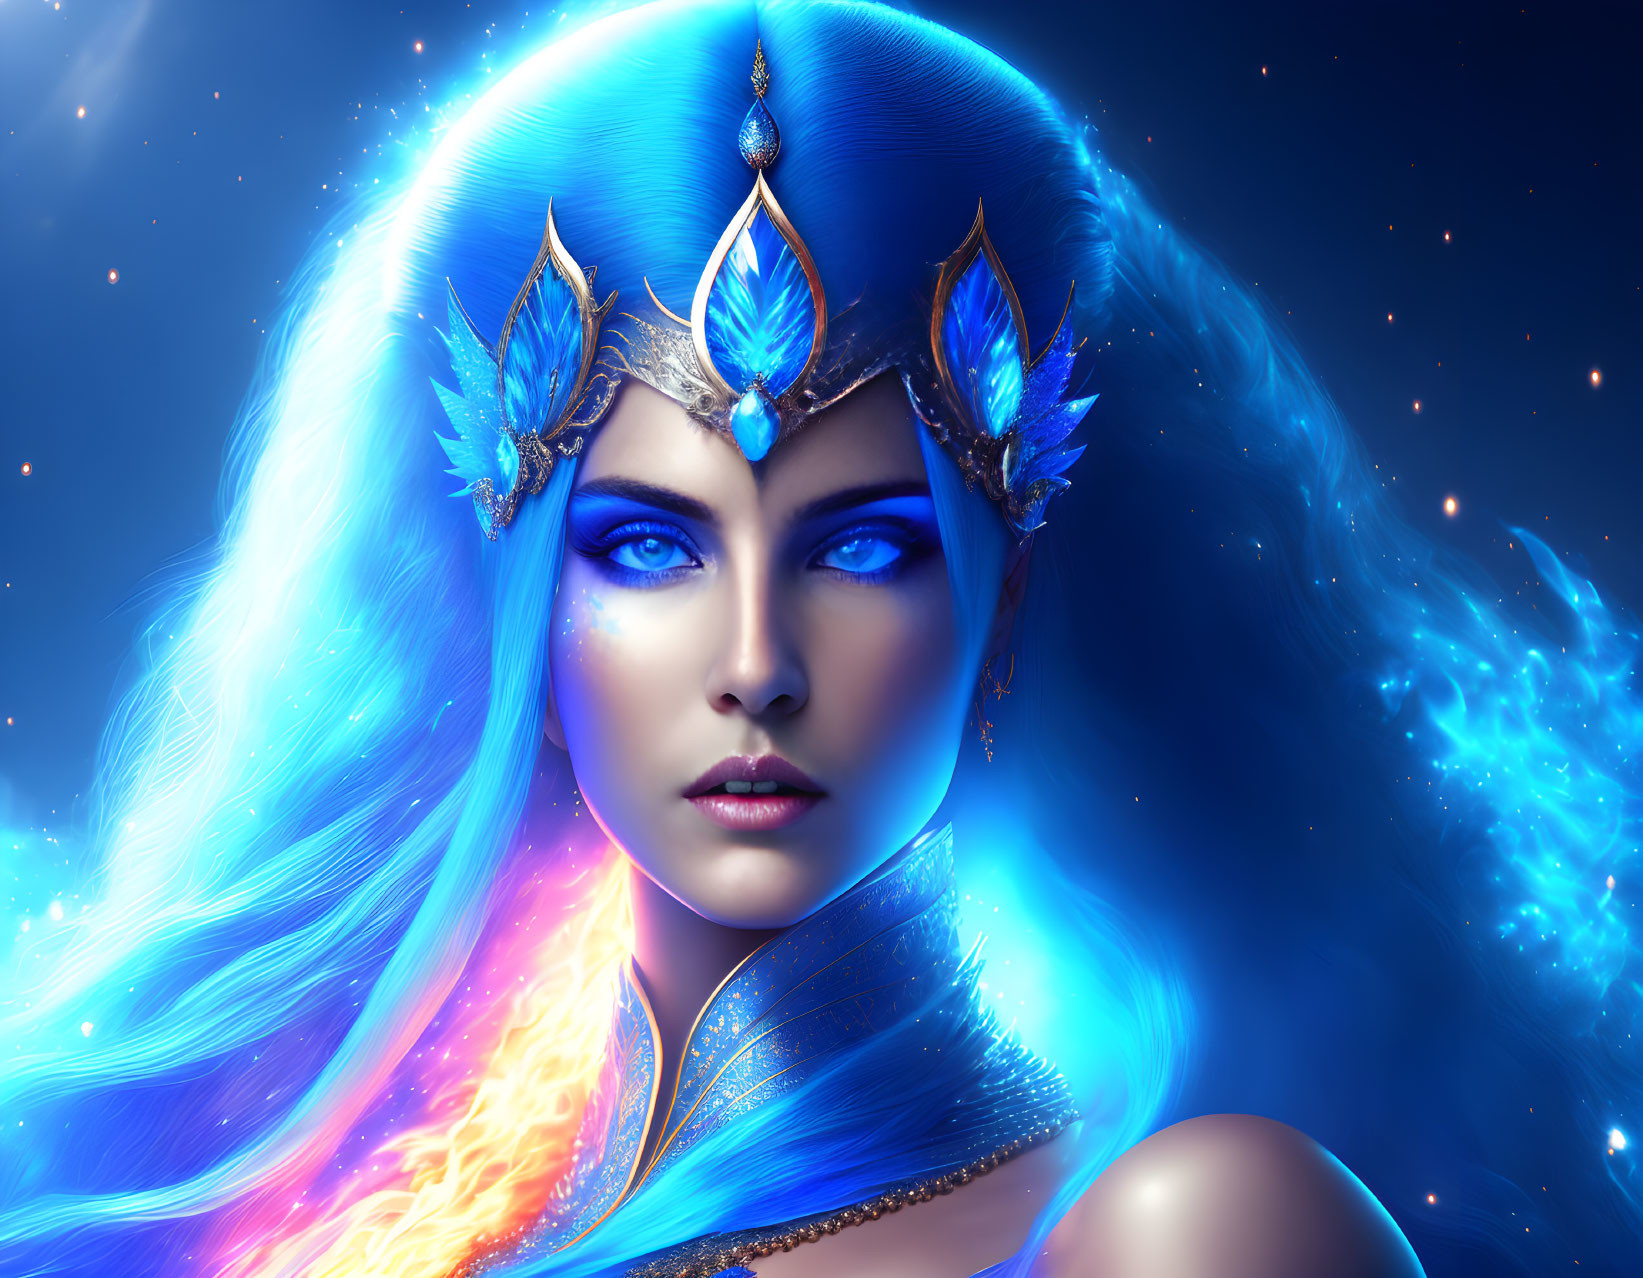 Fantasy illustration of woman with glowing blue hair and crystalline crown